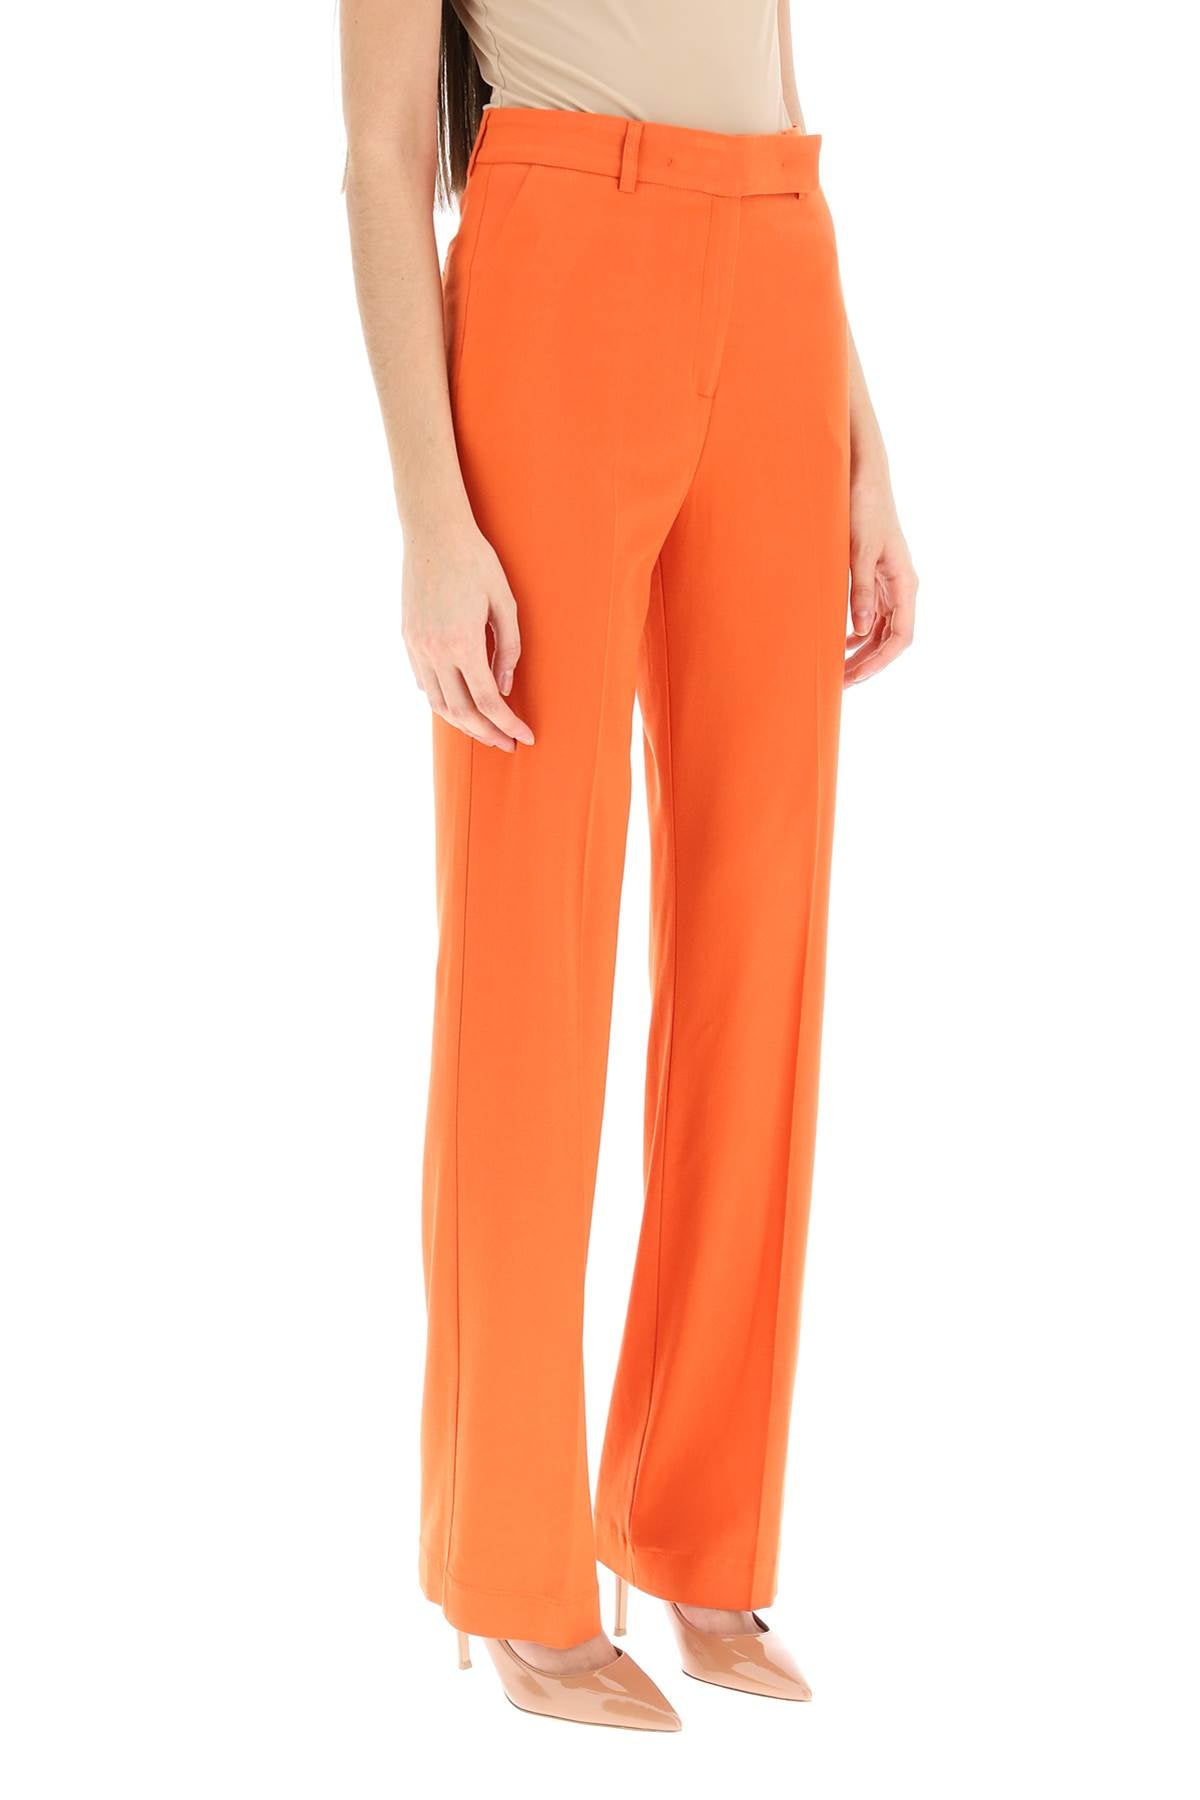 Hebe studio 'lover' canvas trousers-1